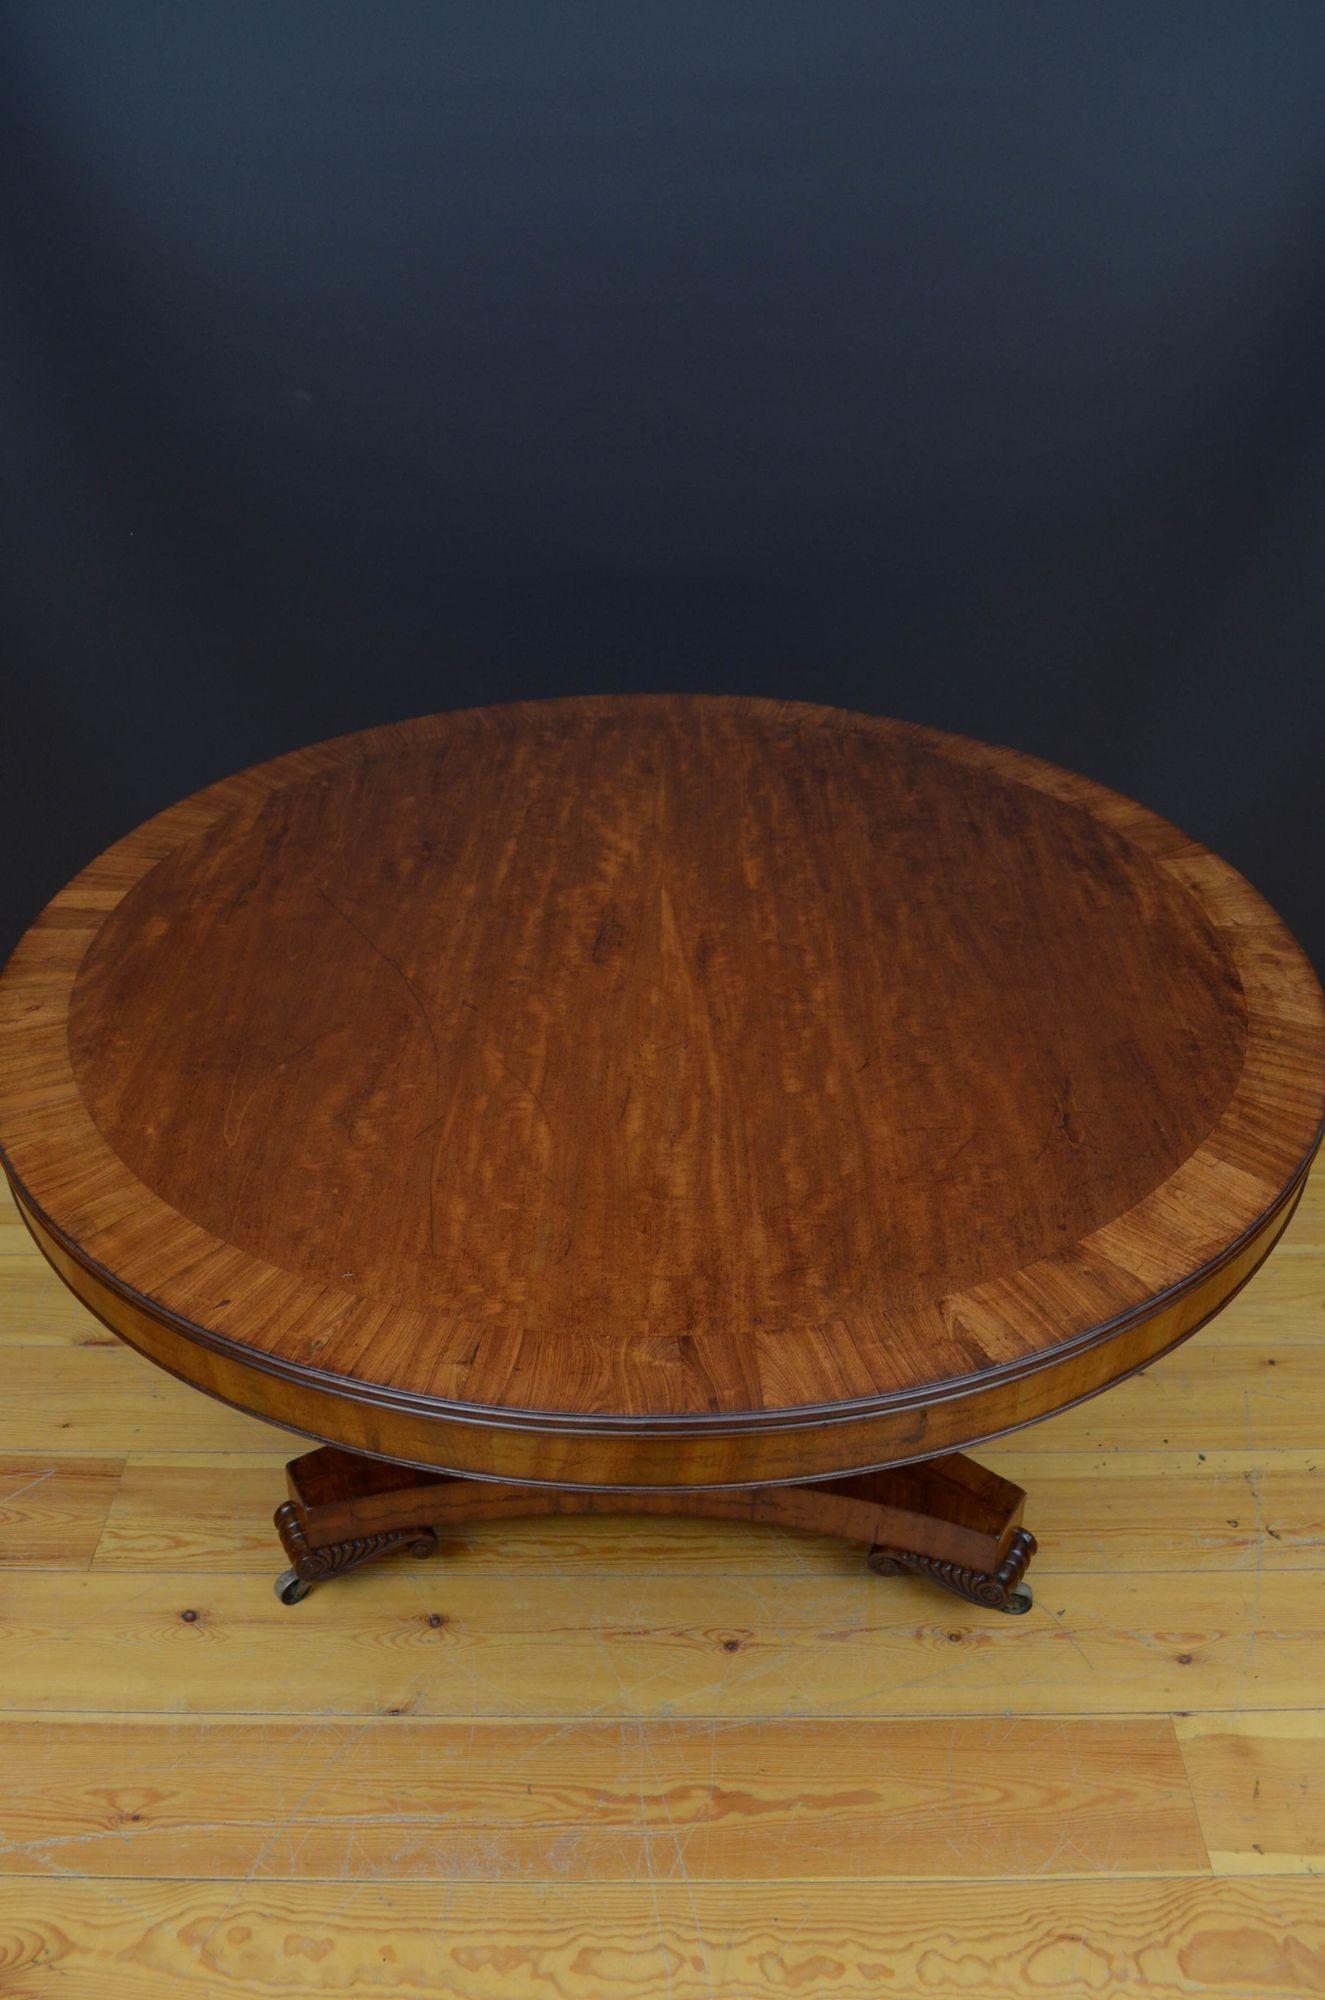 Outstanding Regency Mahogany Centre Table Dining Table In Good Condition For Sale In Whaley Bridge, GB